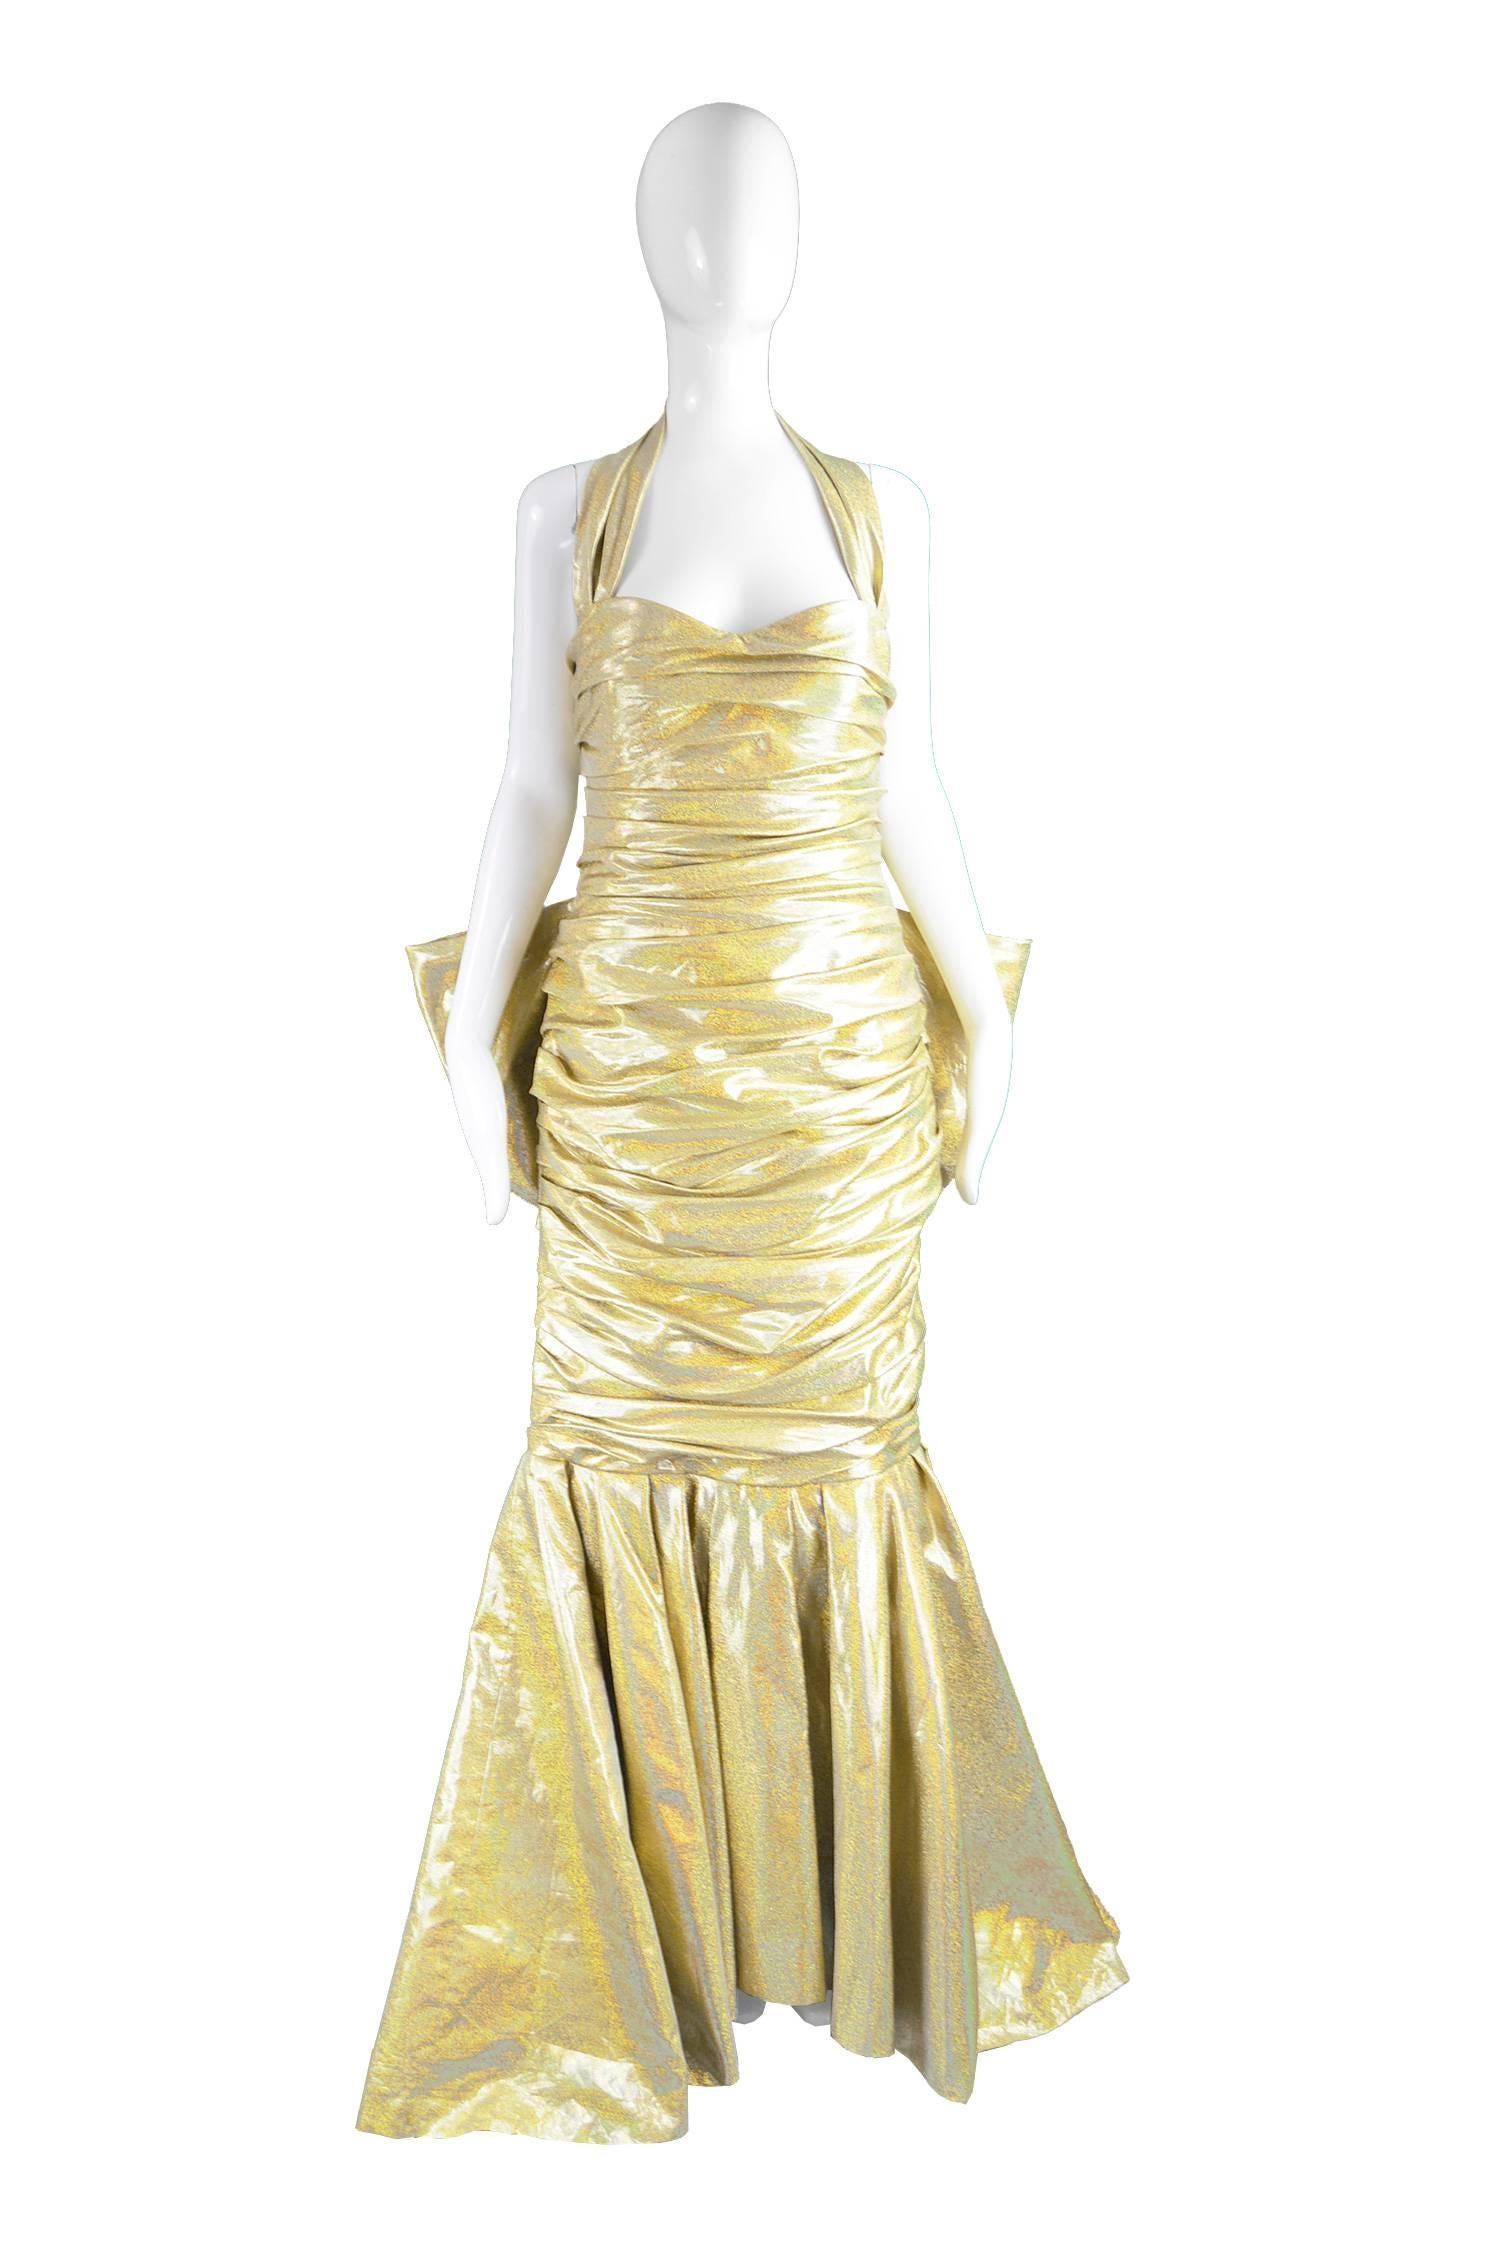 Moschino Couture Iconic Gold 'Barbie Collection' Evening Gown, Spring 2015


Size: Marked GB 14/ US 12/ I 46 D/F 42. Please check measurements to ensure fit. 
Bust - 36” / 91cm
Waist - 30” / 76cm
Hips - 40” / 101cm
Length (Bust to Hem, including